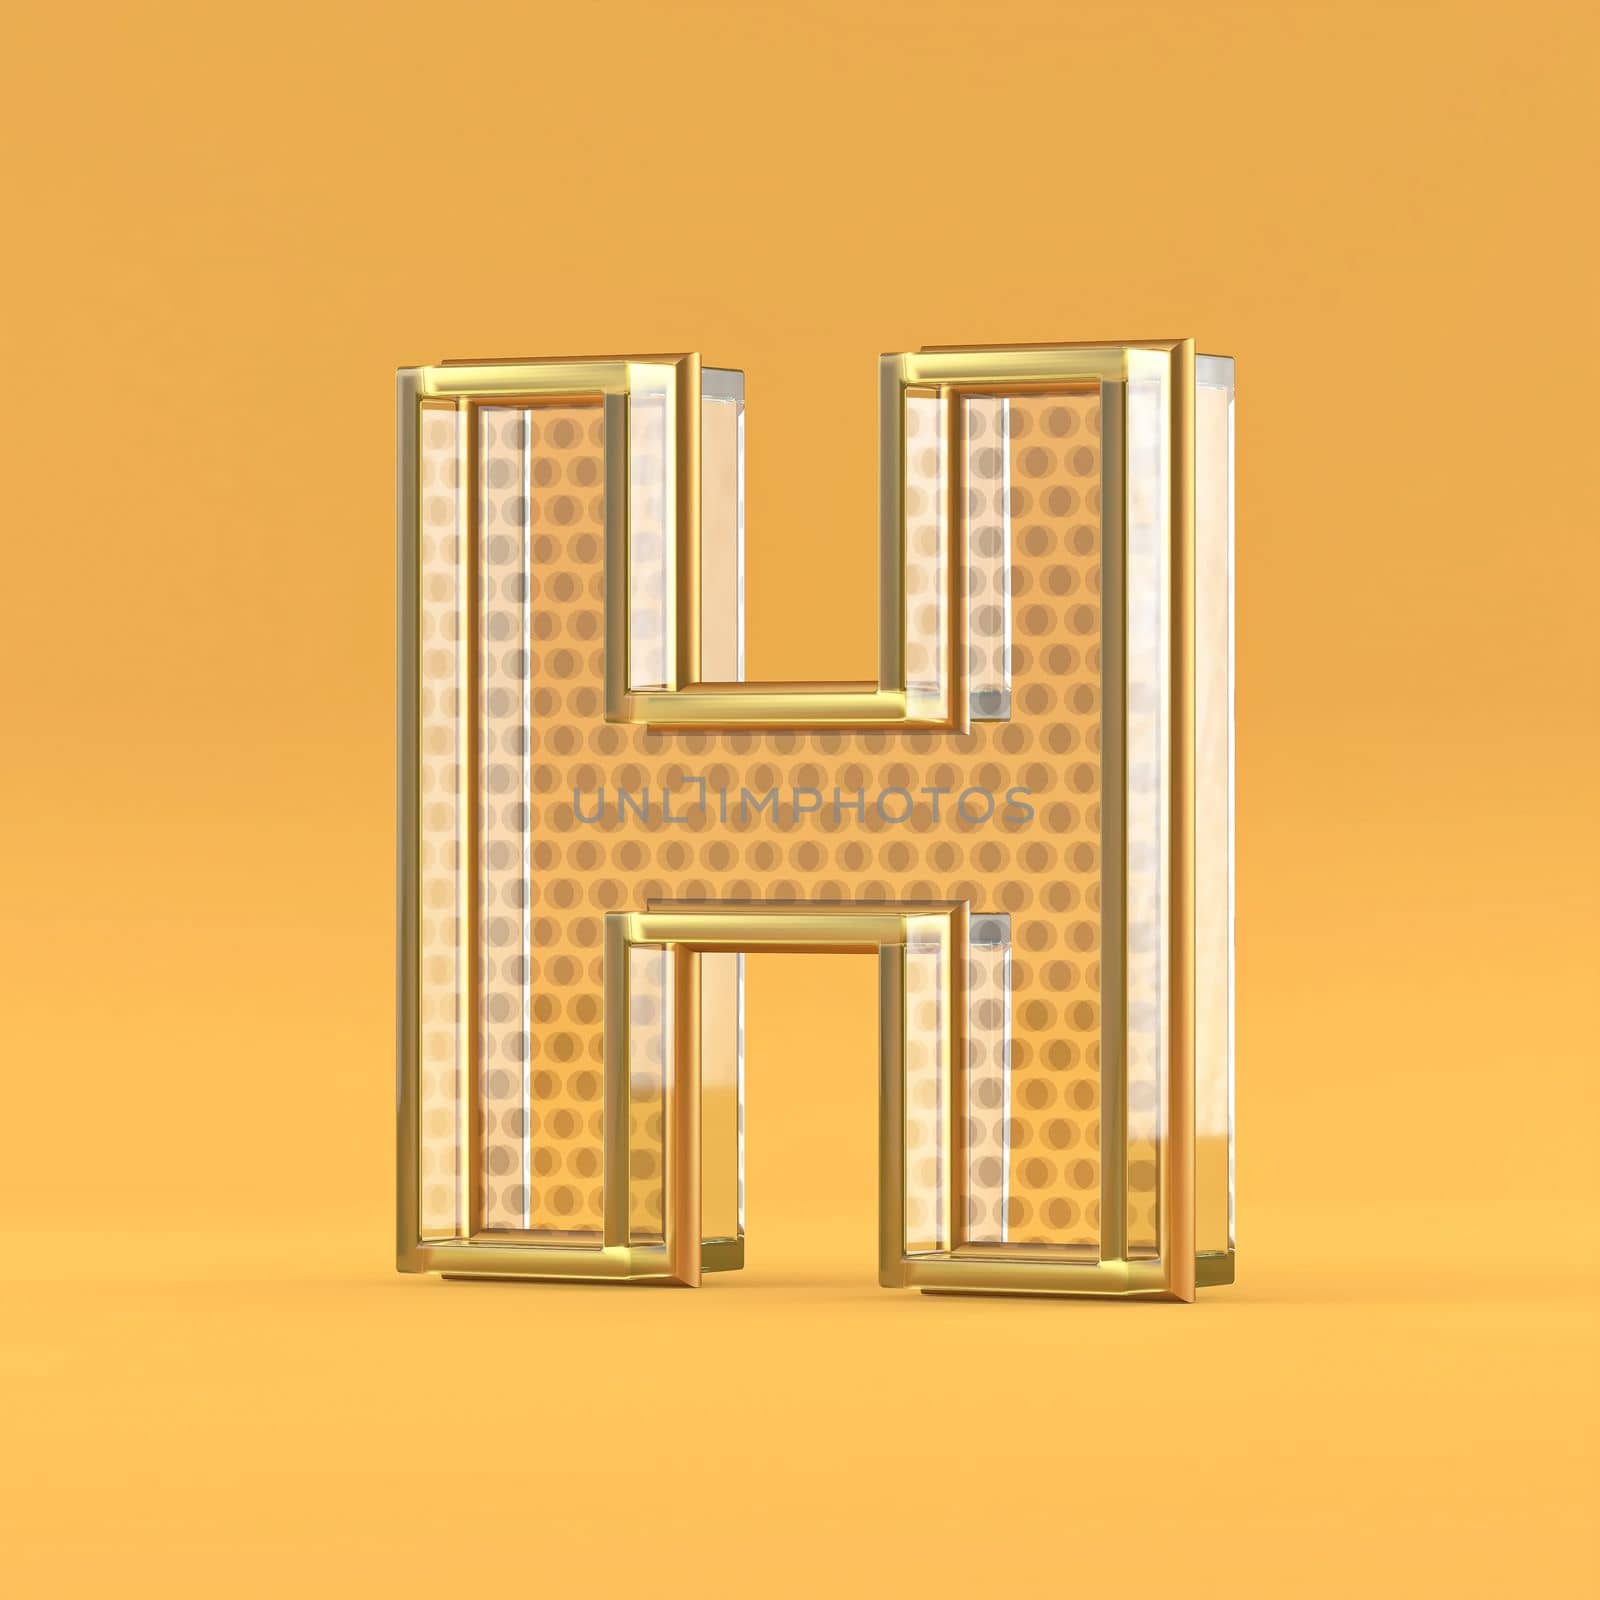 Gold wire and glass font letter H 3D rendering illustration isolated on orange background